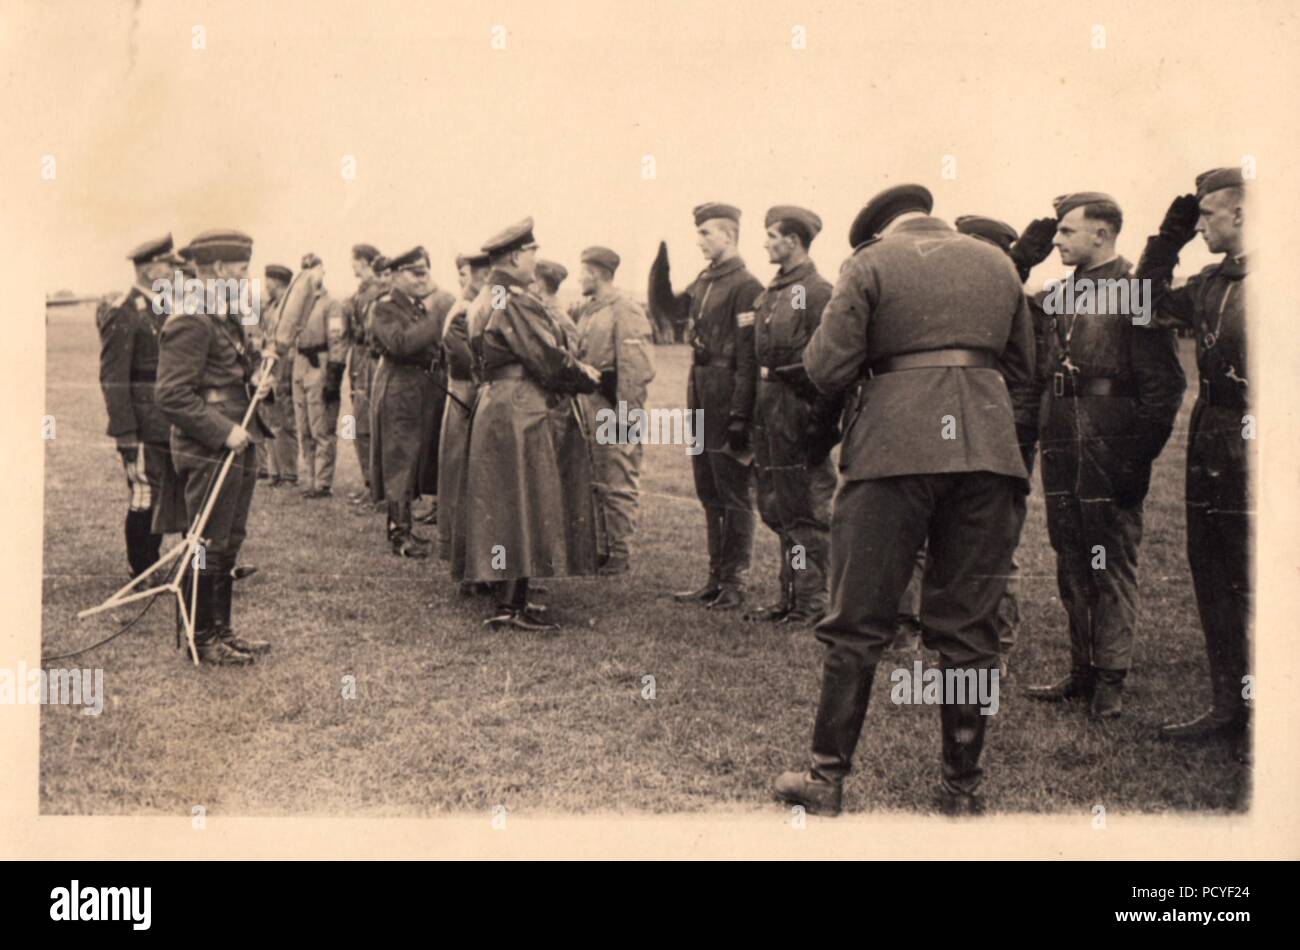 Image from the photo album of Oberfeldwebel Gotthilf Benseler of 9. Staffel, Kampfgeschwader 3: Reichsmarschall Hermann Göring visits III./KG3 on 25th September 1939, following the successful Poland Campaign. During his visit he presented Iron Crosses 2nd Class to flight crew. Stock Photo